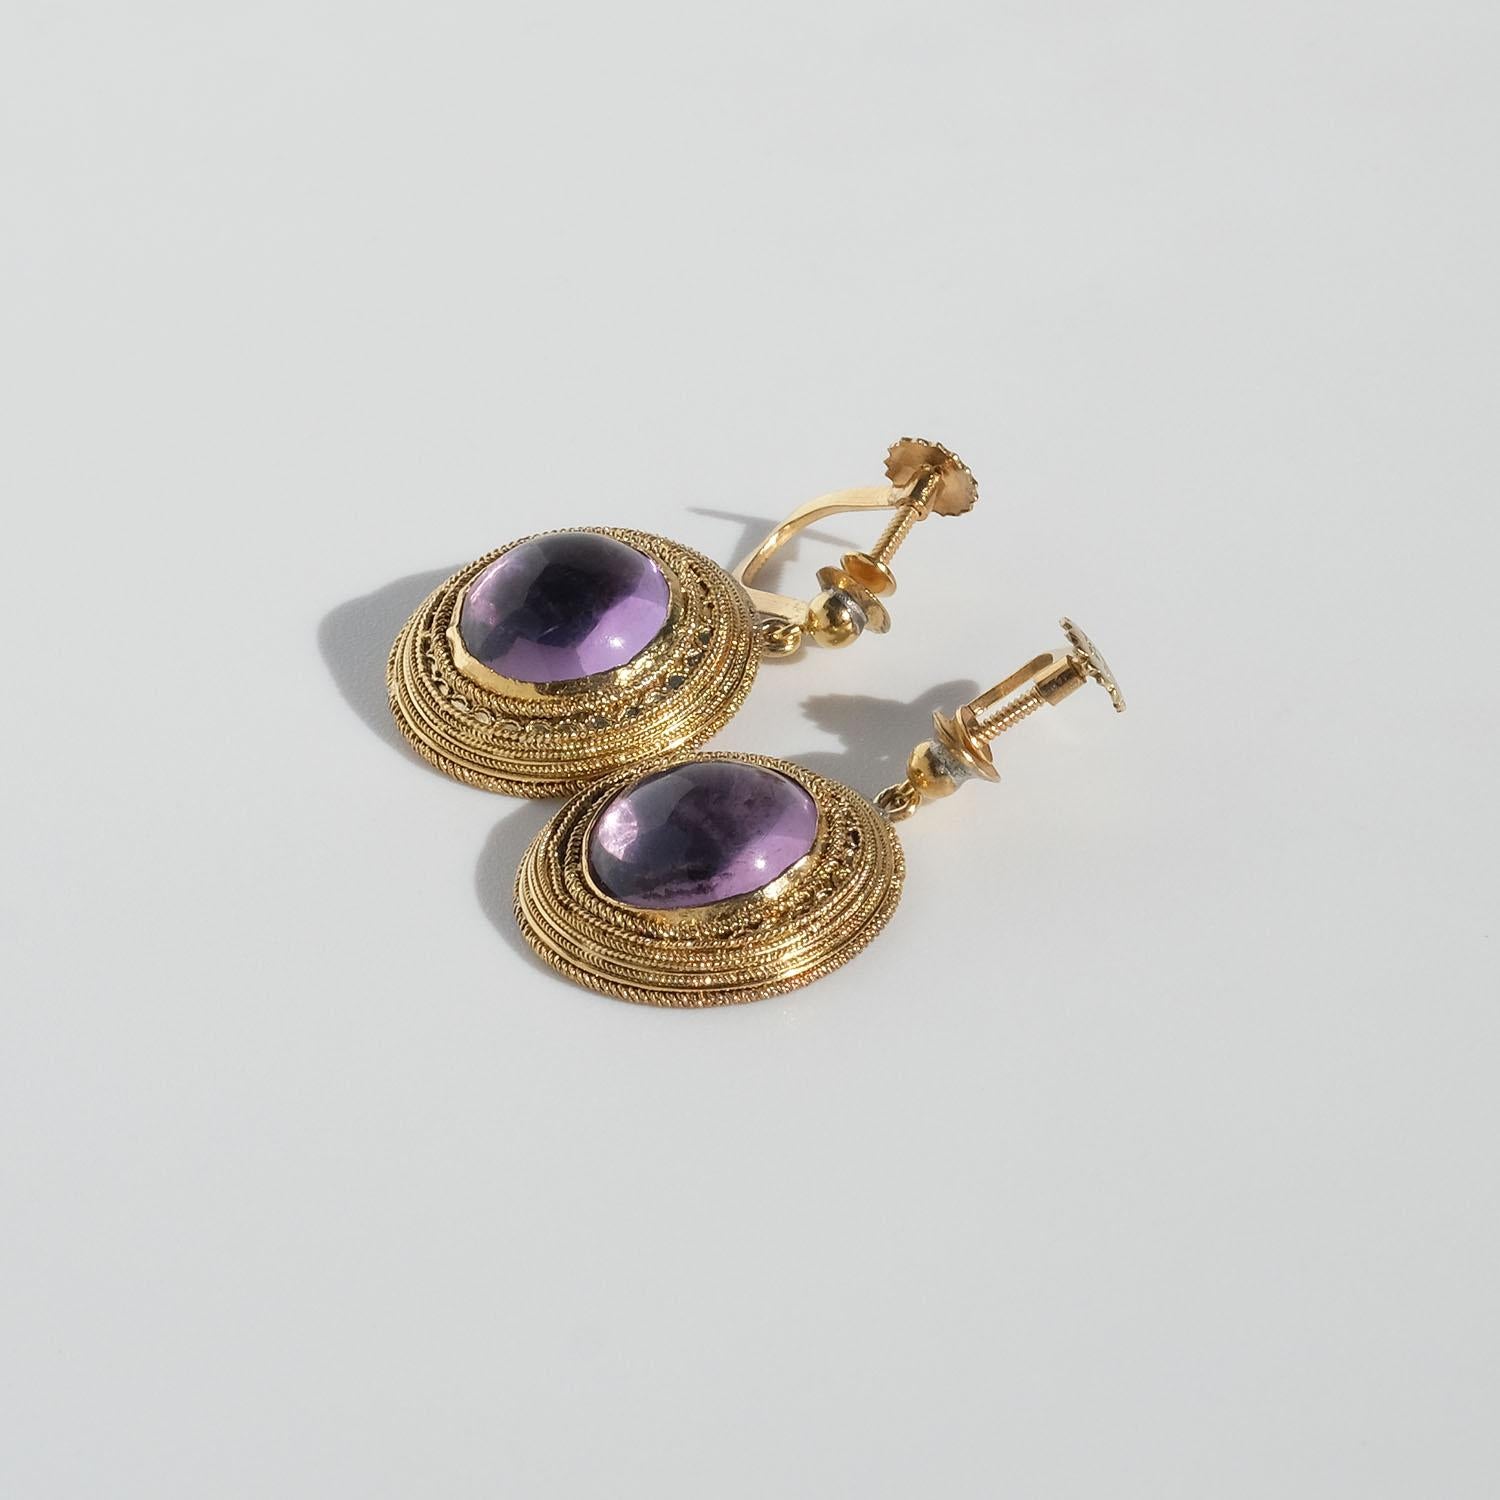 Antique earrings. Gilded silver and amethysts. For Sale 1